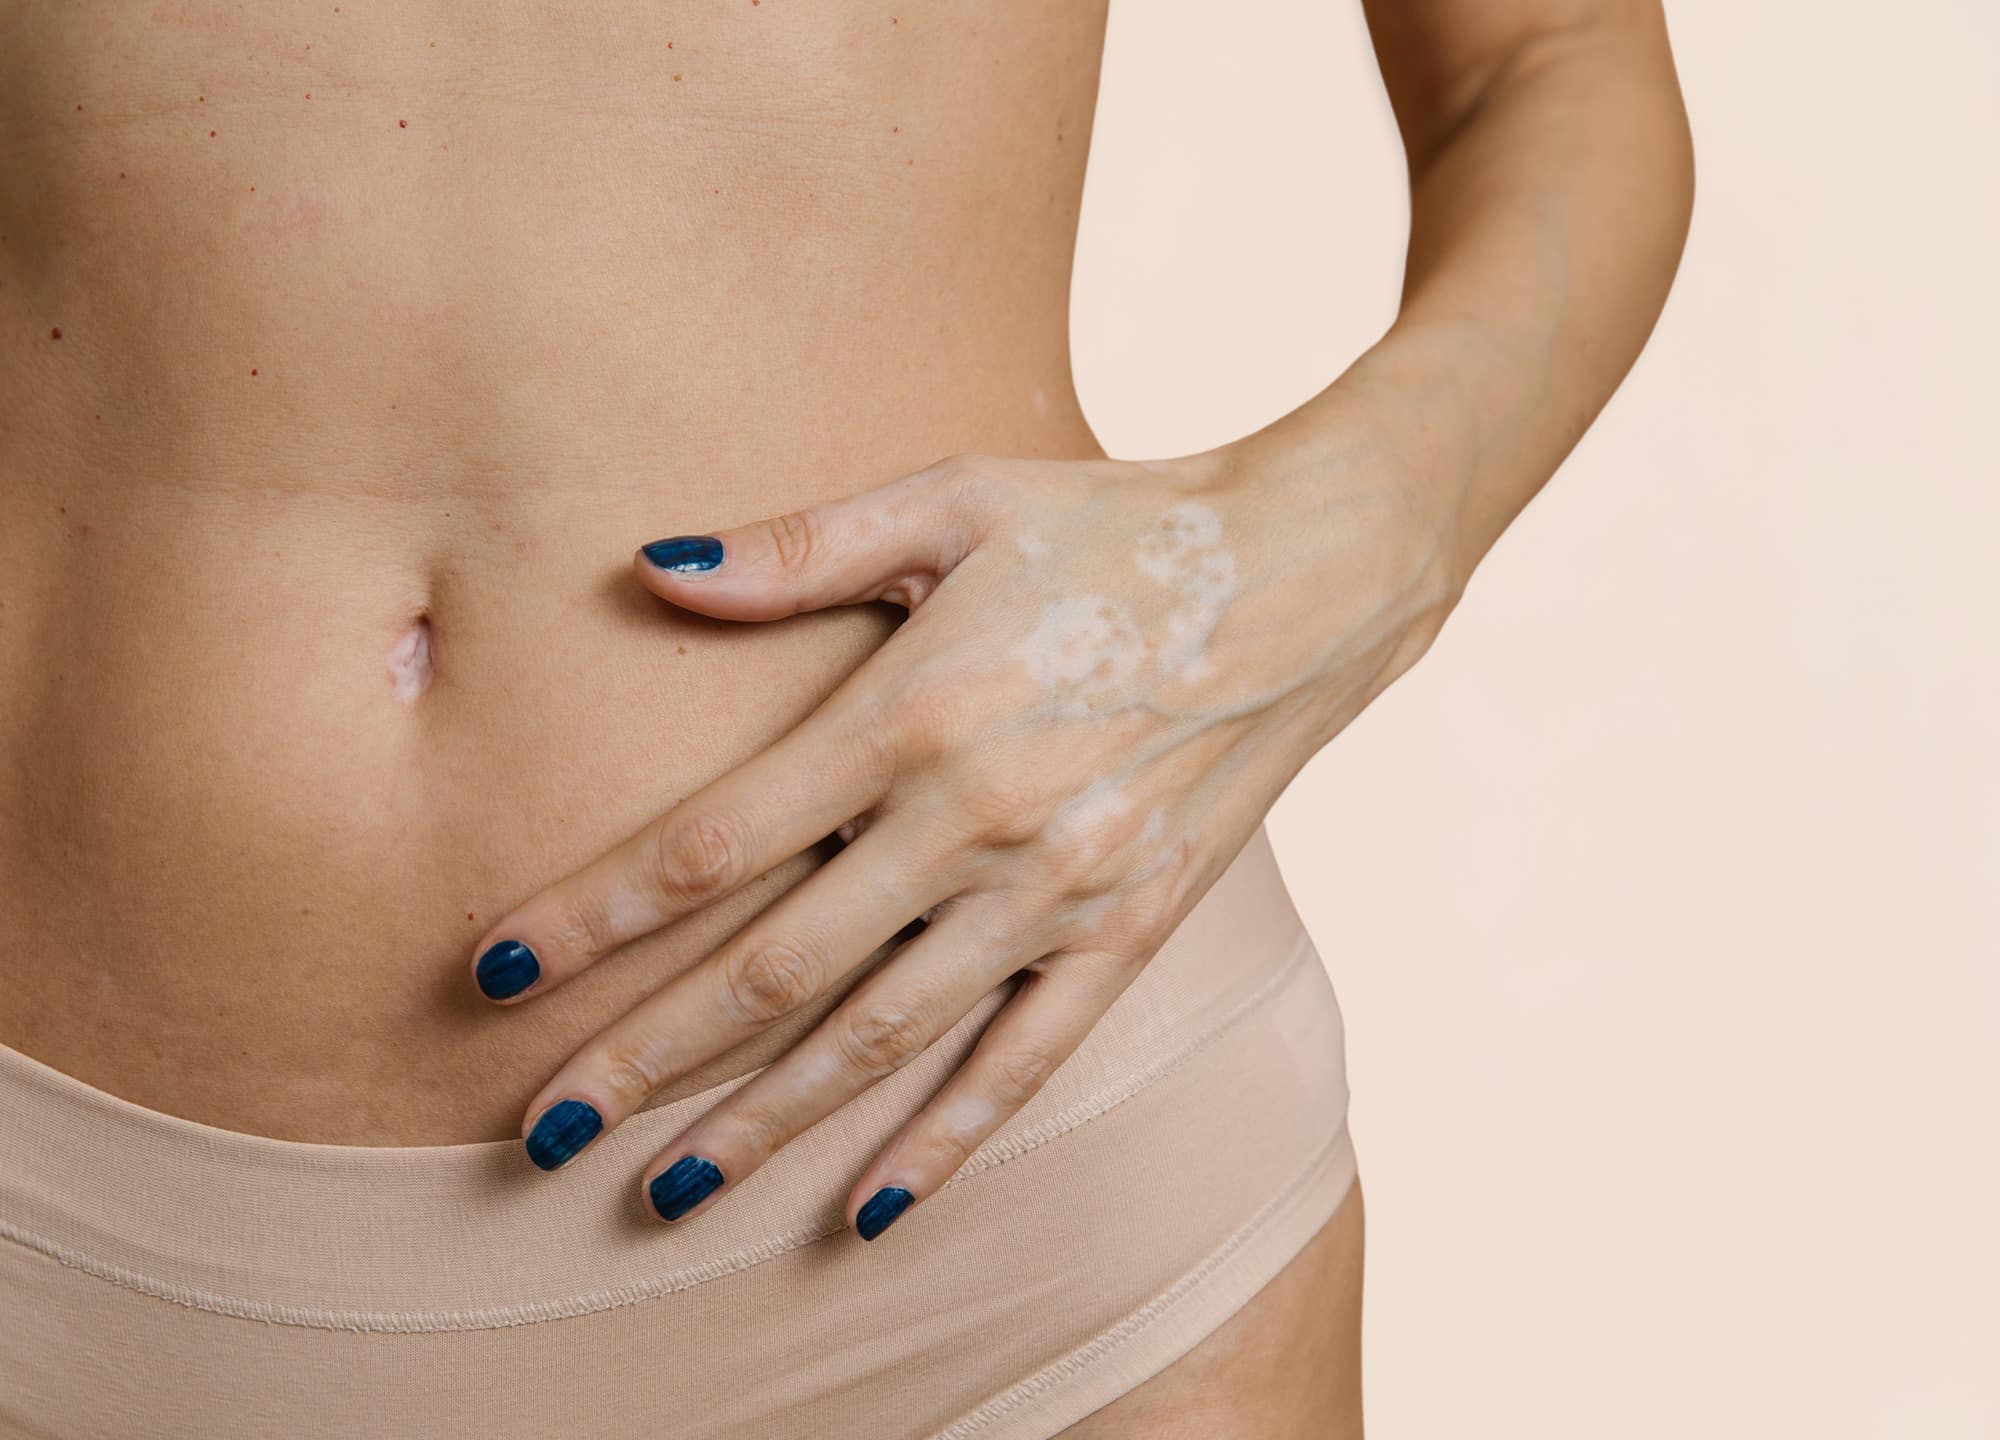 Why Do I Need Compression After a Tummy Tuck?